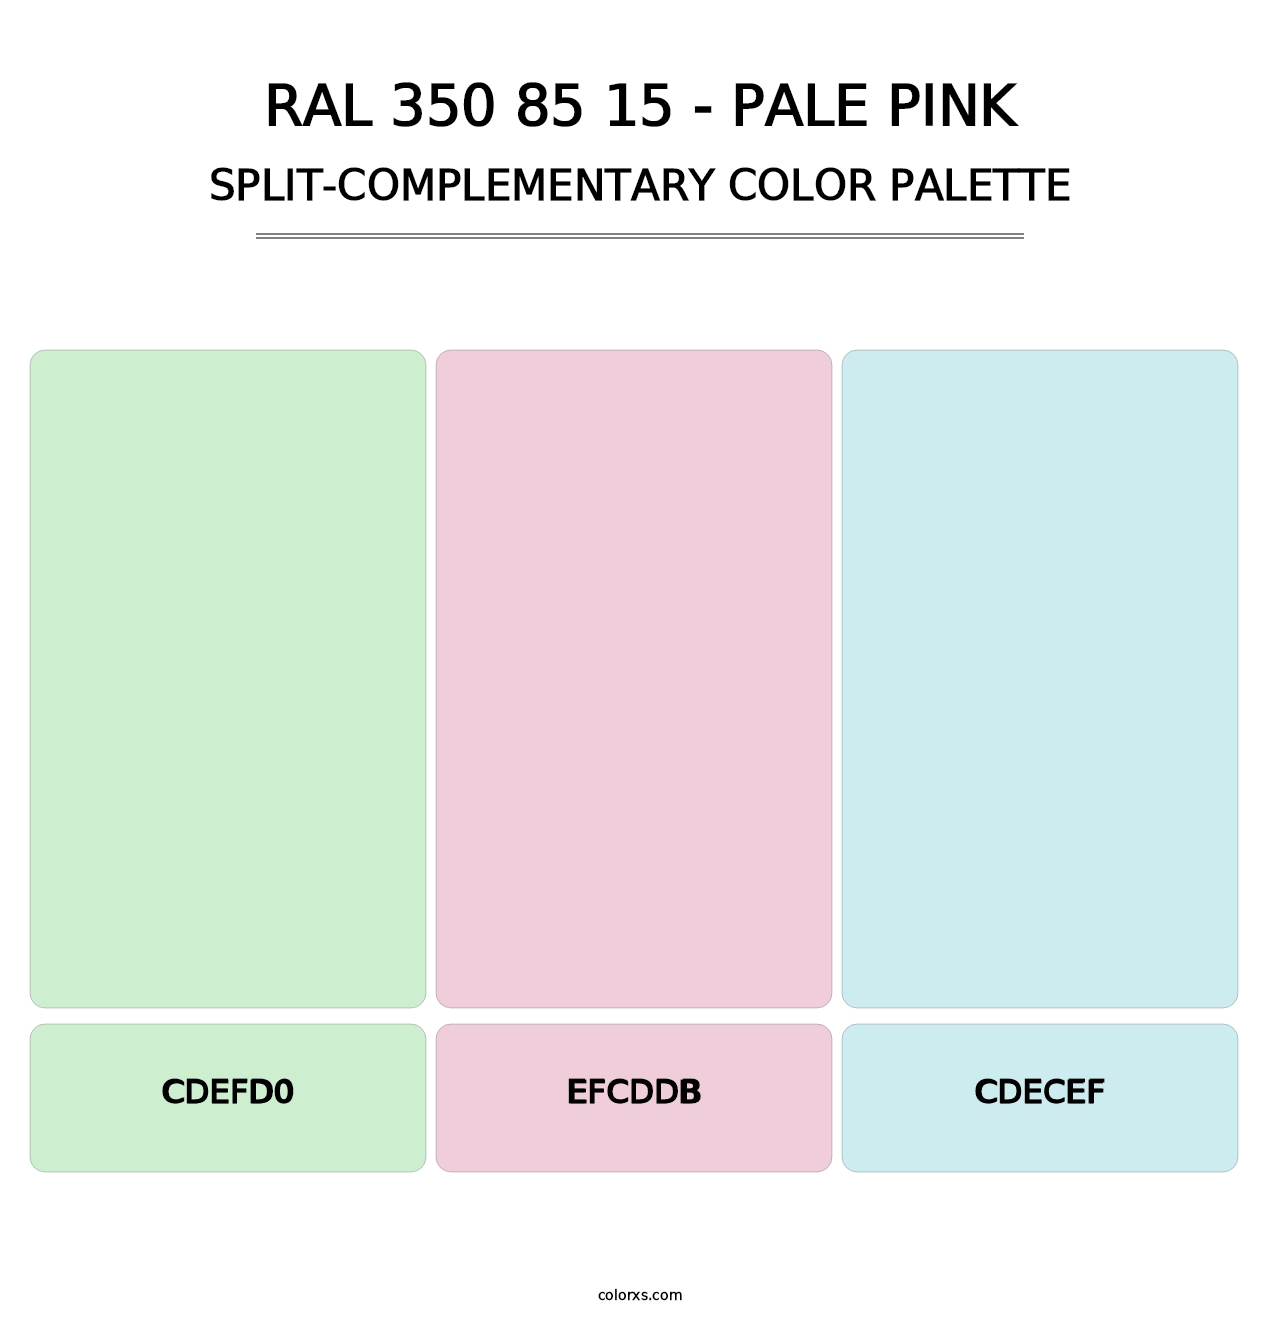 RAL 350 85 15 - Pale Pink - Split-Complementary Color Palette